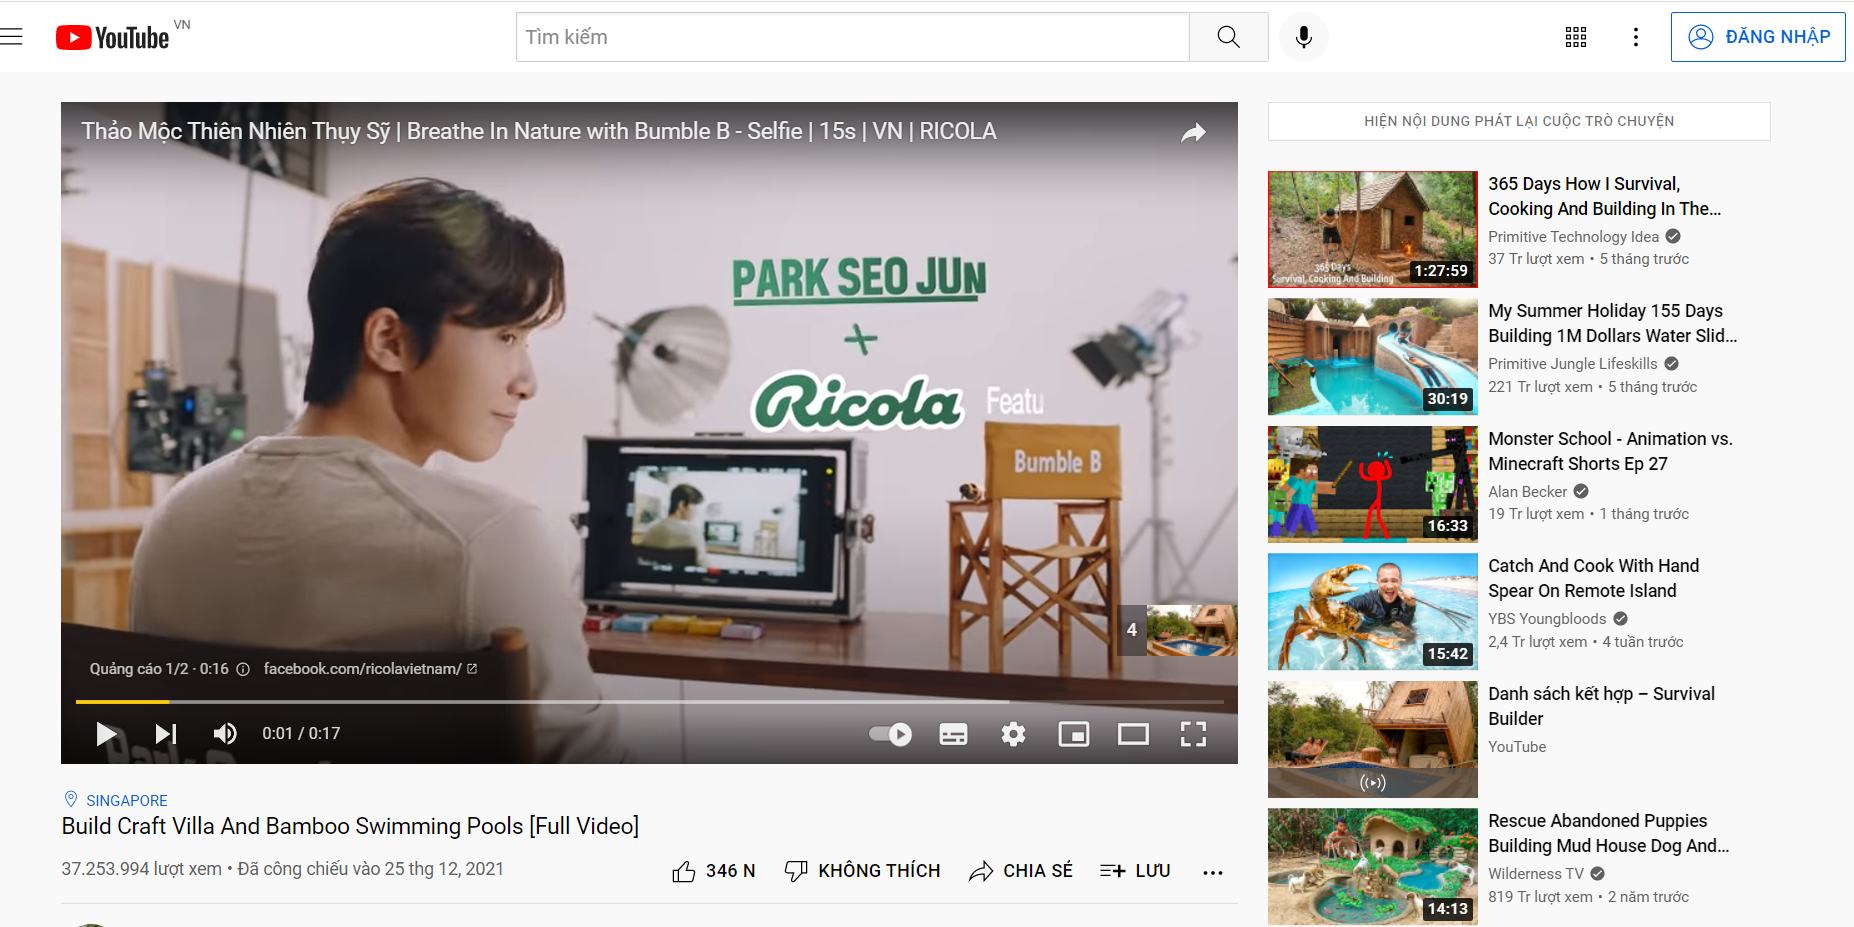 Skippable Video Ads - YouTube Ads